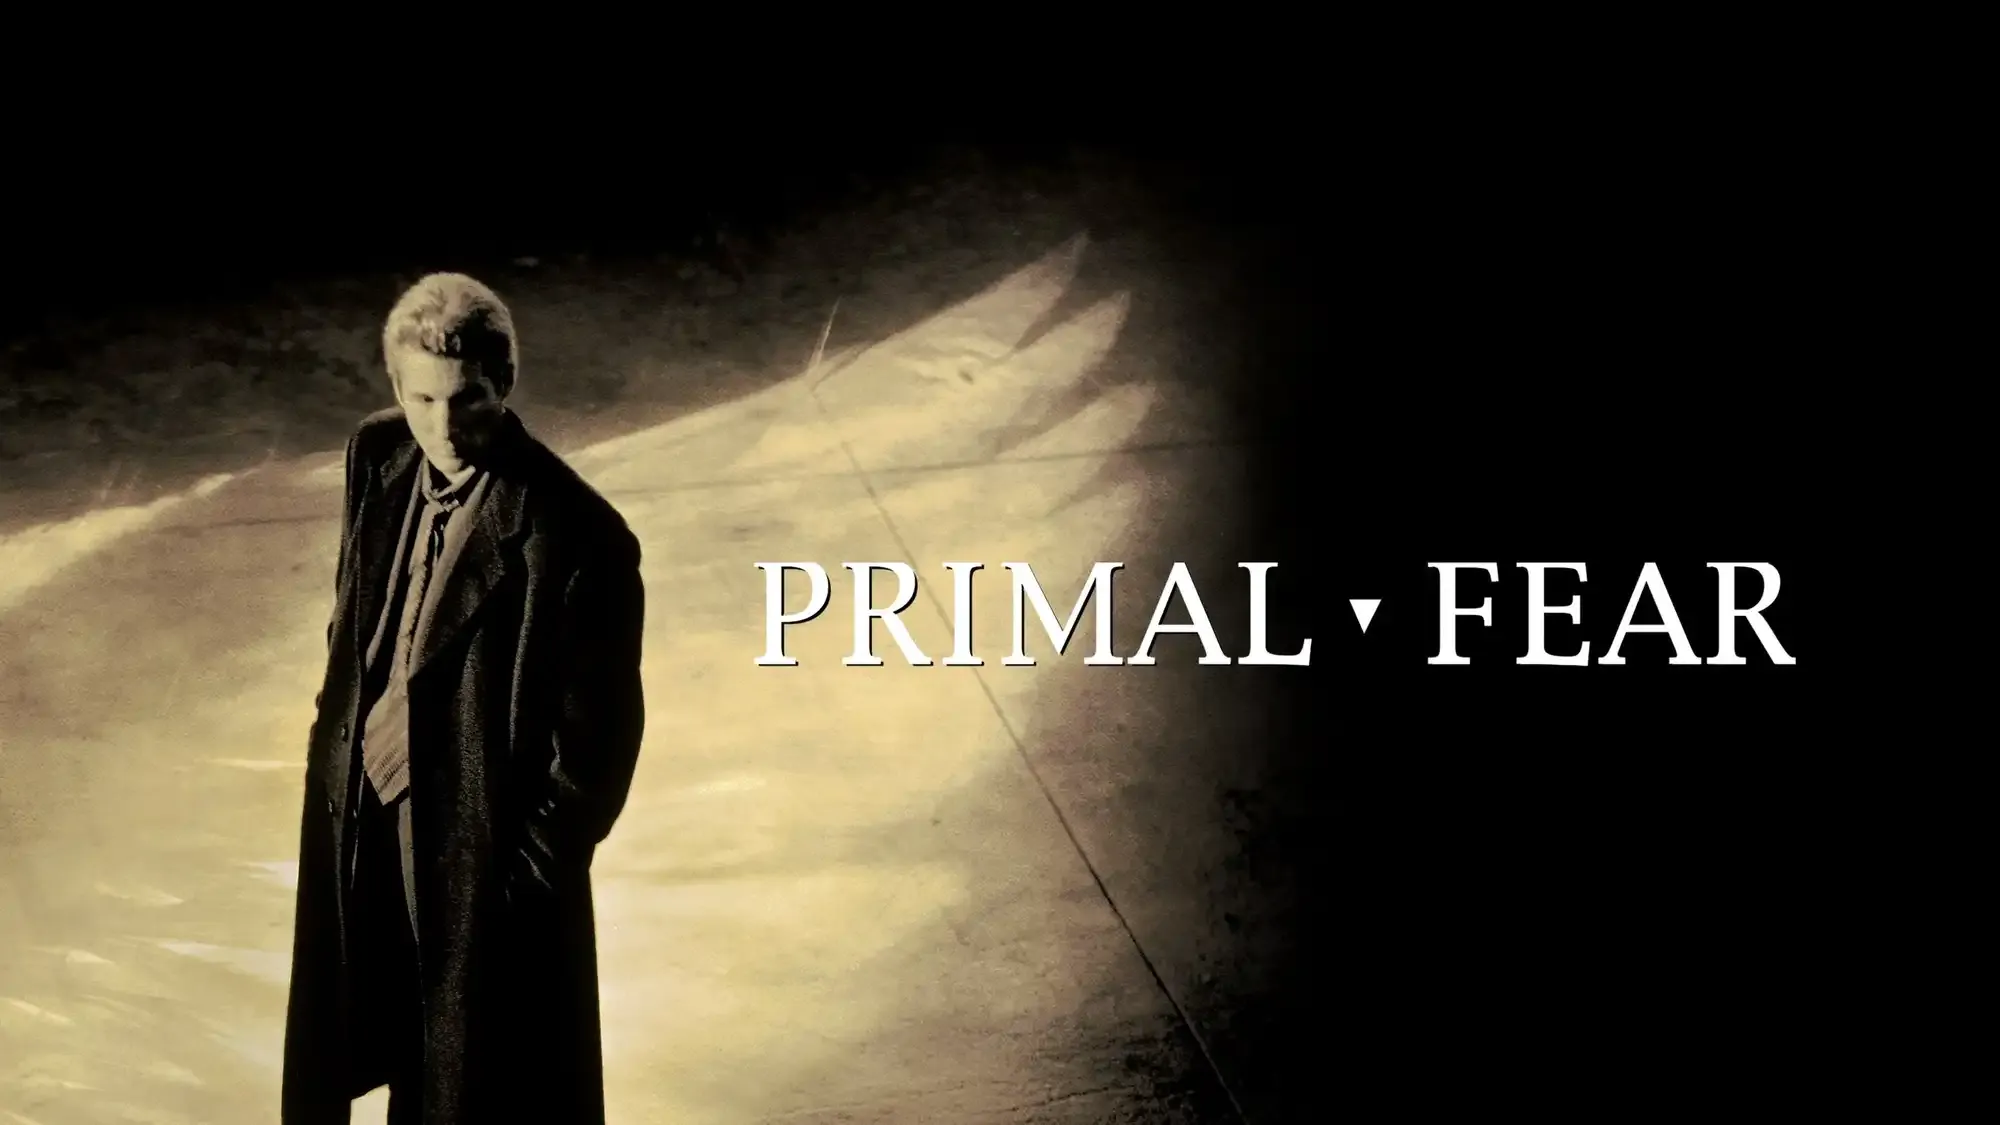 Primal Fear movie review